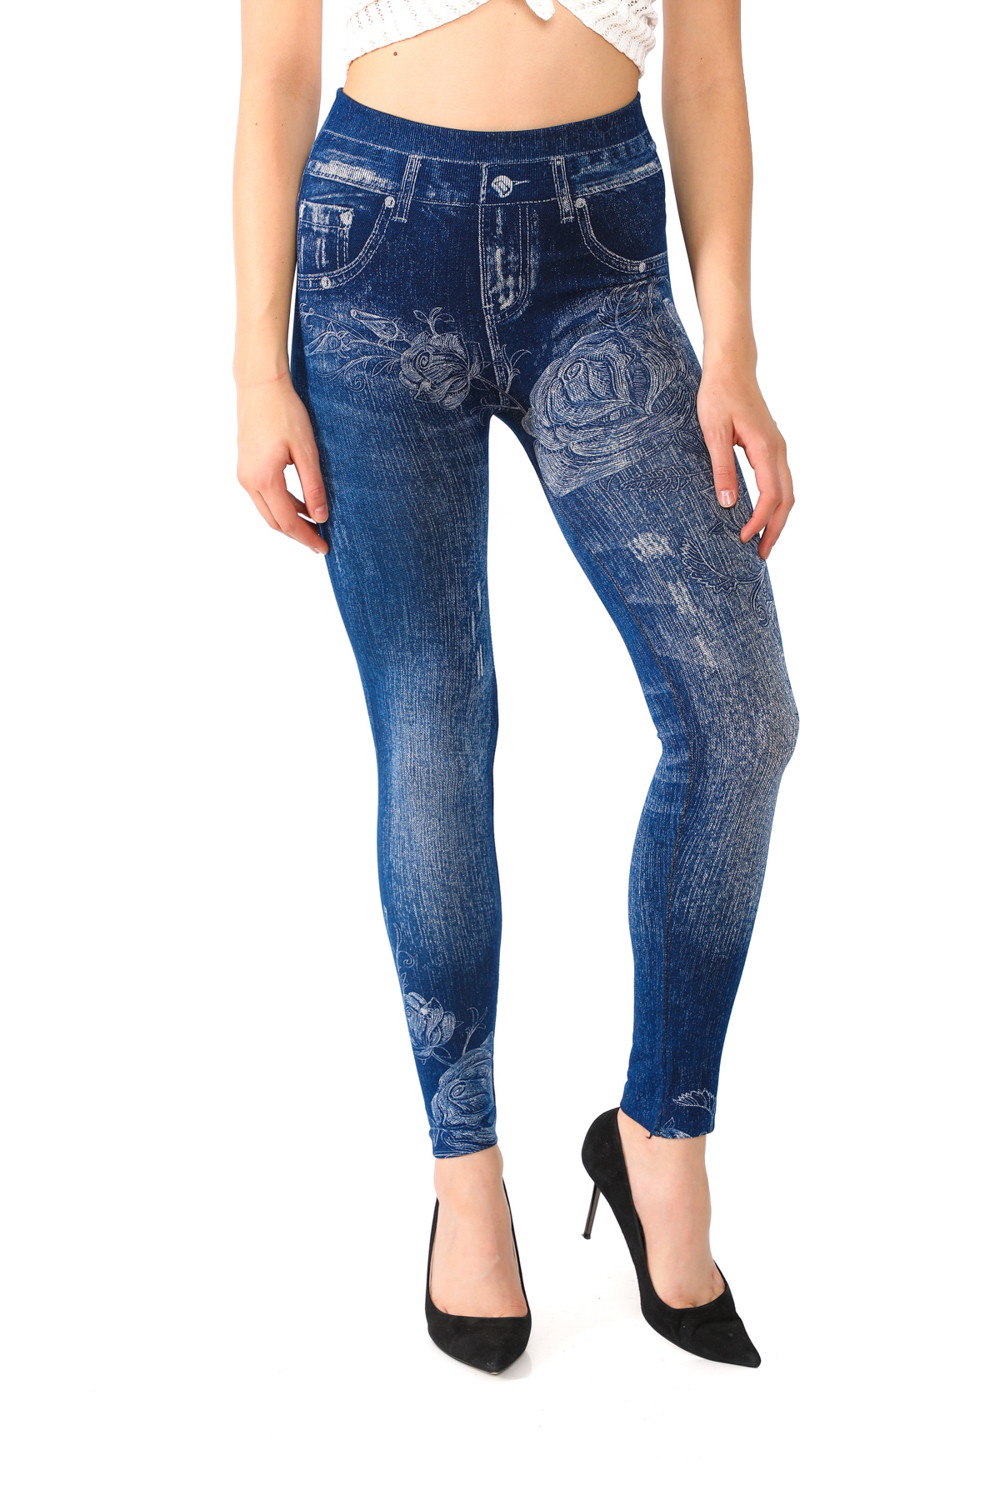 Denim Leggings with Rosy Floral Pattern - 6